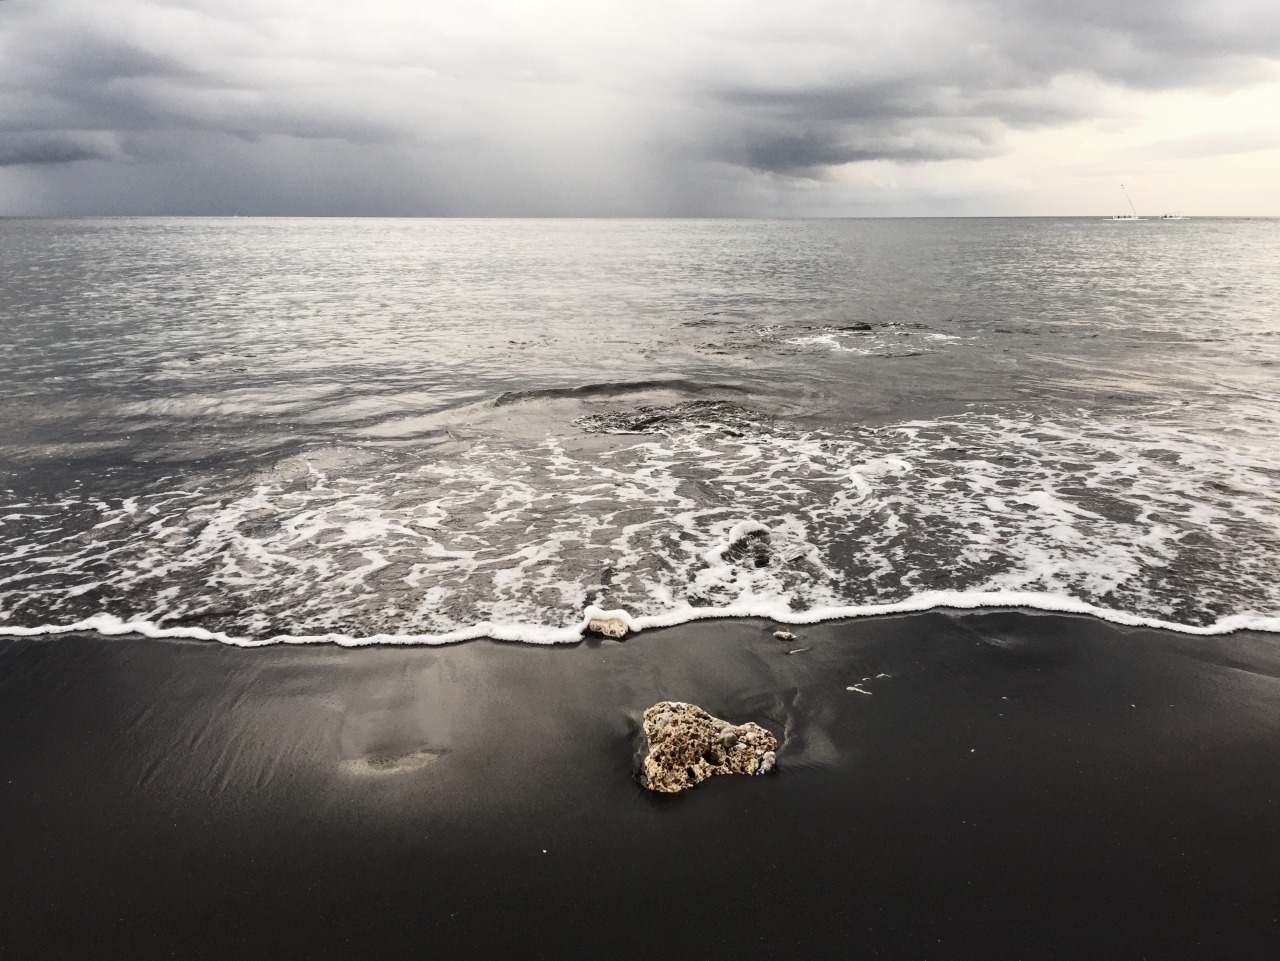 Volcanic black sand beach in Amed, Bali. The most gorgeously surreal beach I’ve